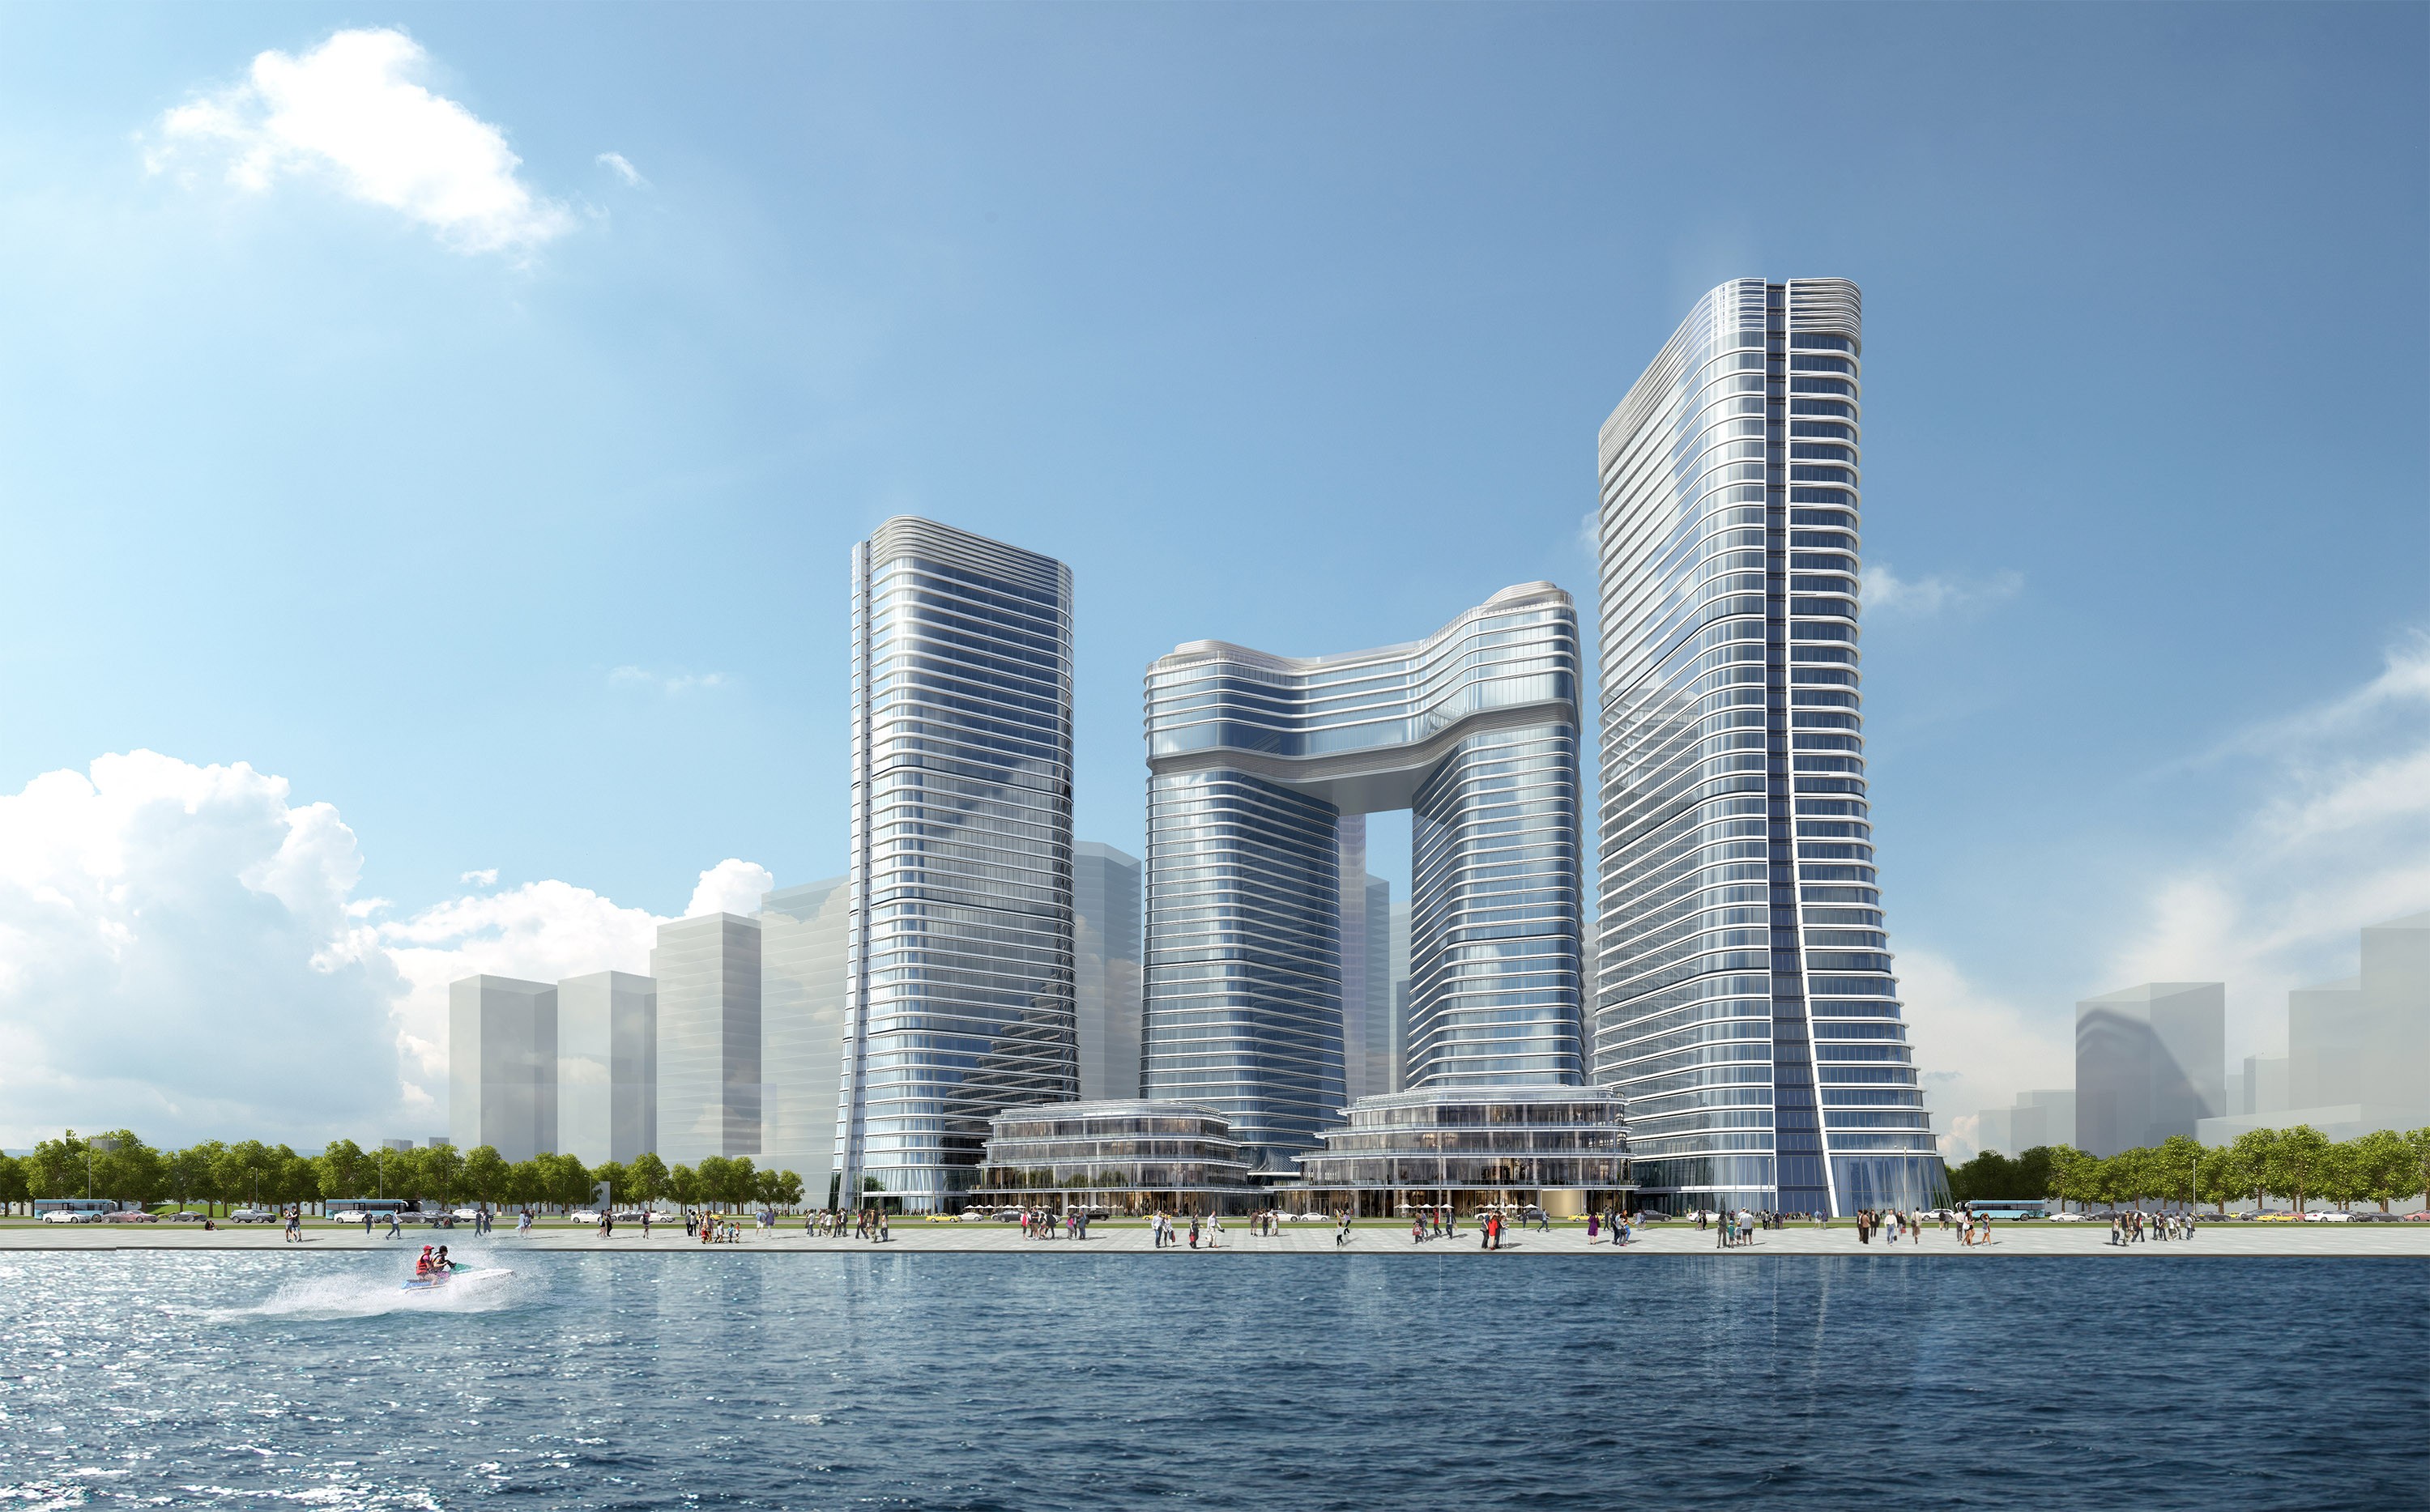 Winland International Finance Centre Xiamen is expected to be a new landmark within an emerging financial district to the east of the city.